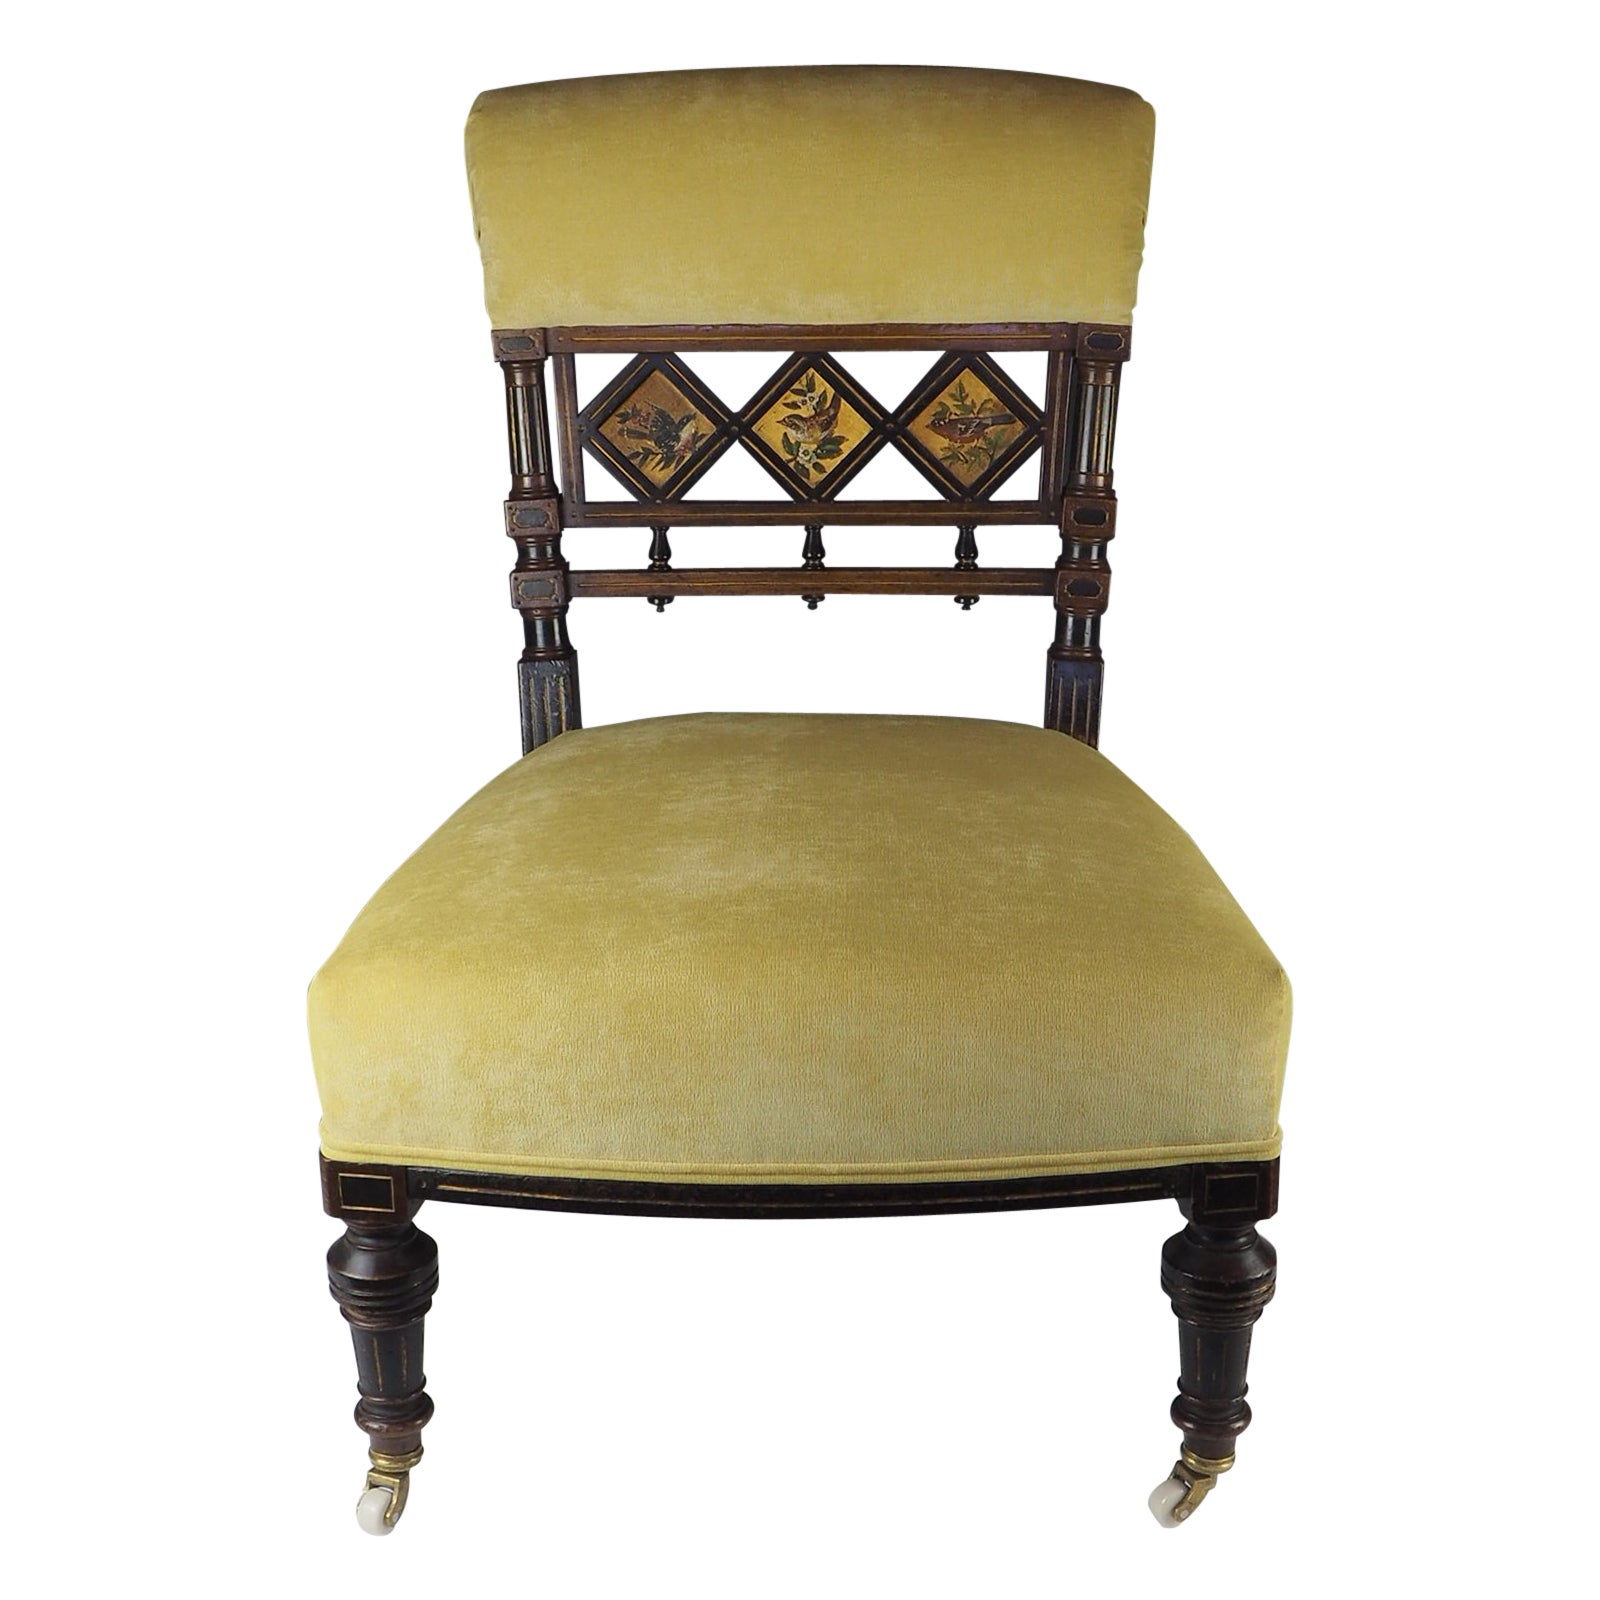 Aesthetic Movement Ebonised and Gilt Side Chair with Hand Painted Birds, c. 1870